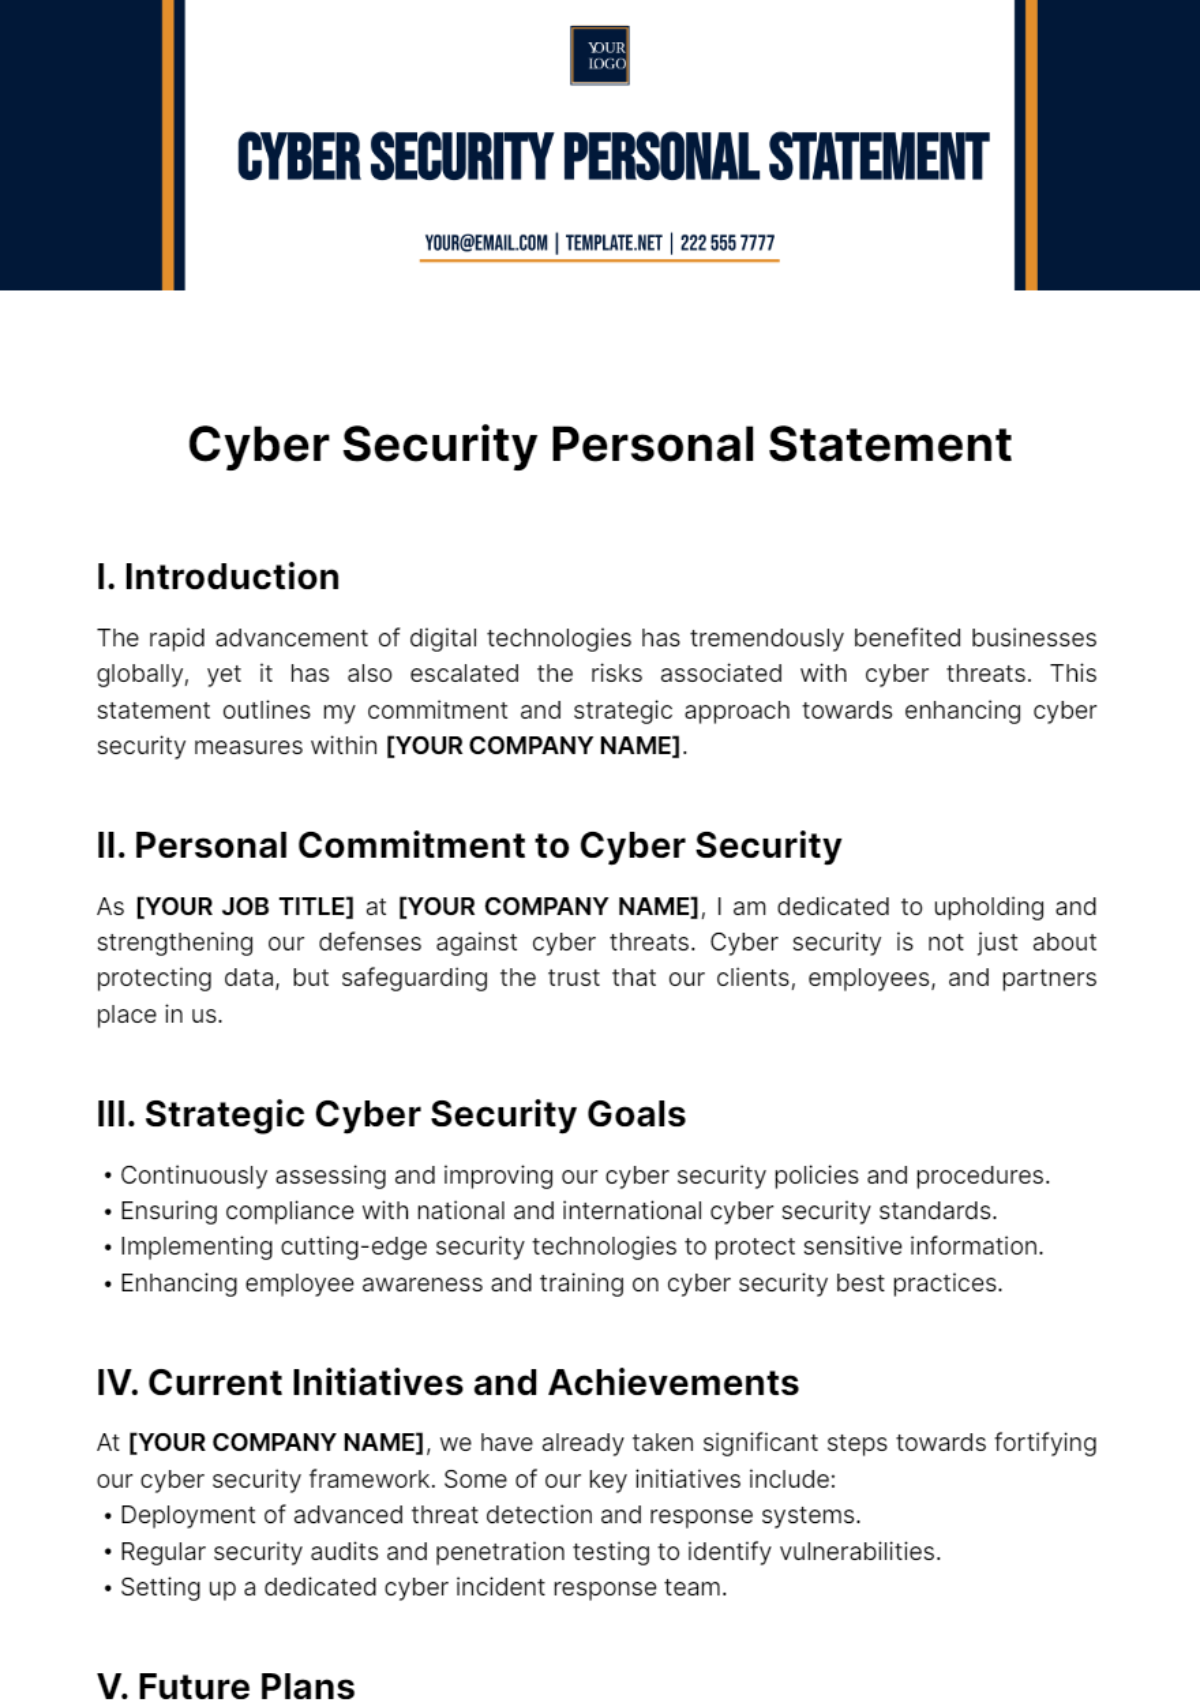 Cyber Security Personal Statement Template